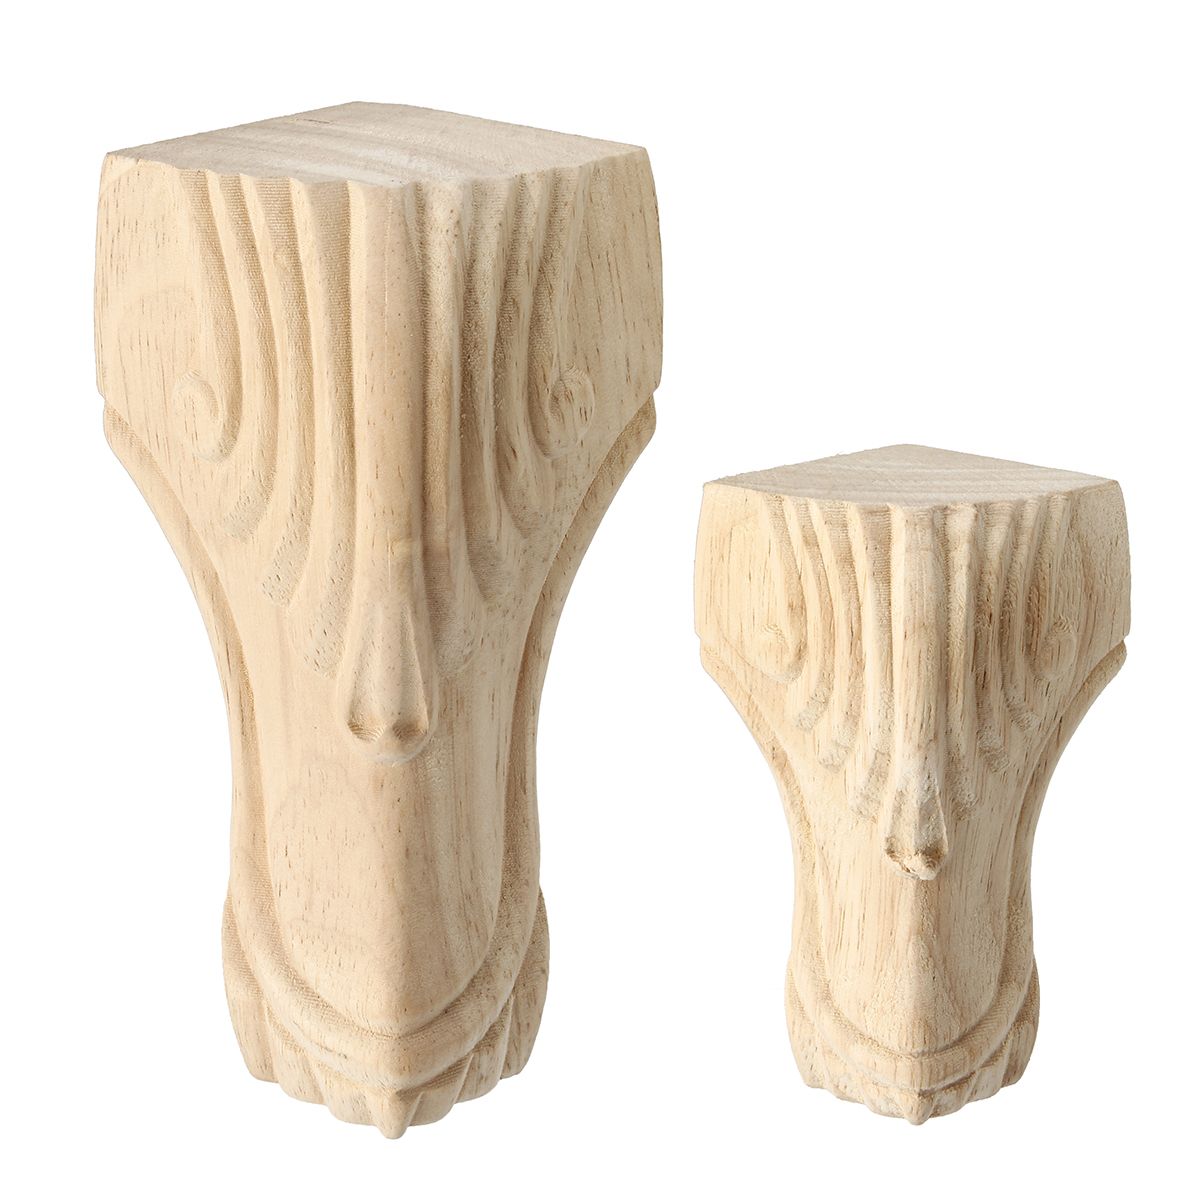 4Pcs-1015cm-European-Solid-Wood-Carving-Furniture-Foot-Legs-Unpainted-Couch-Cabinet-Sofa-Seat-Feets-1321345